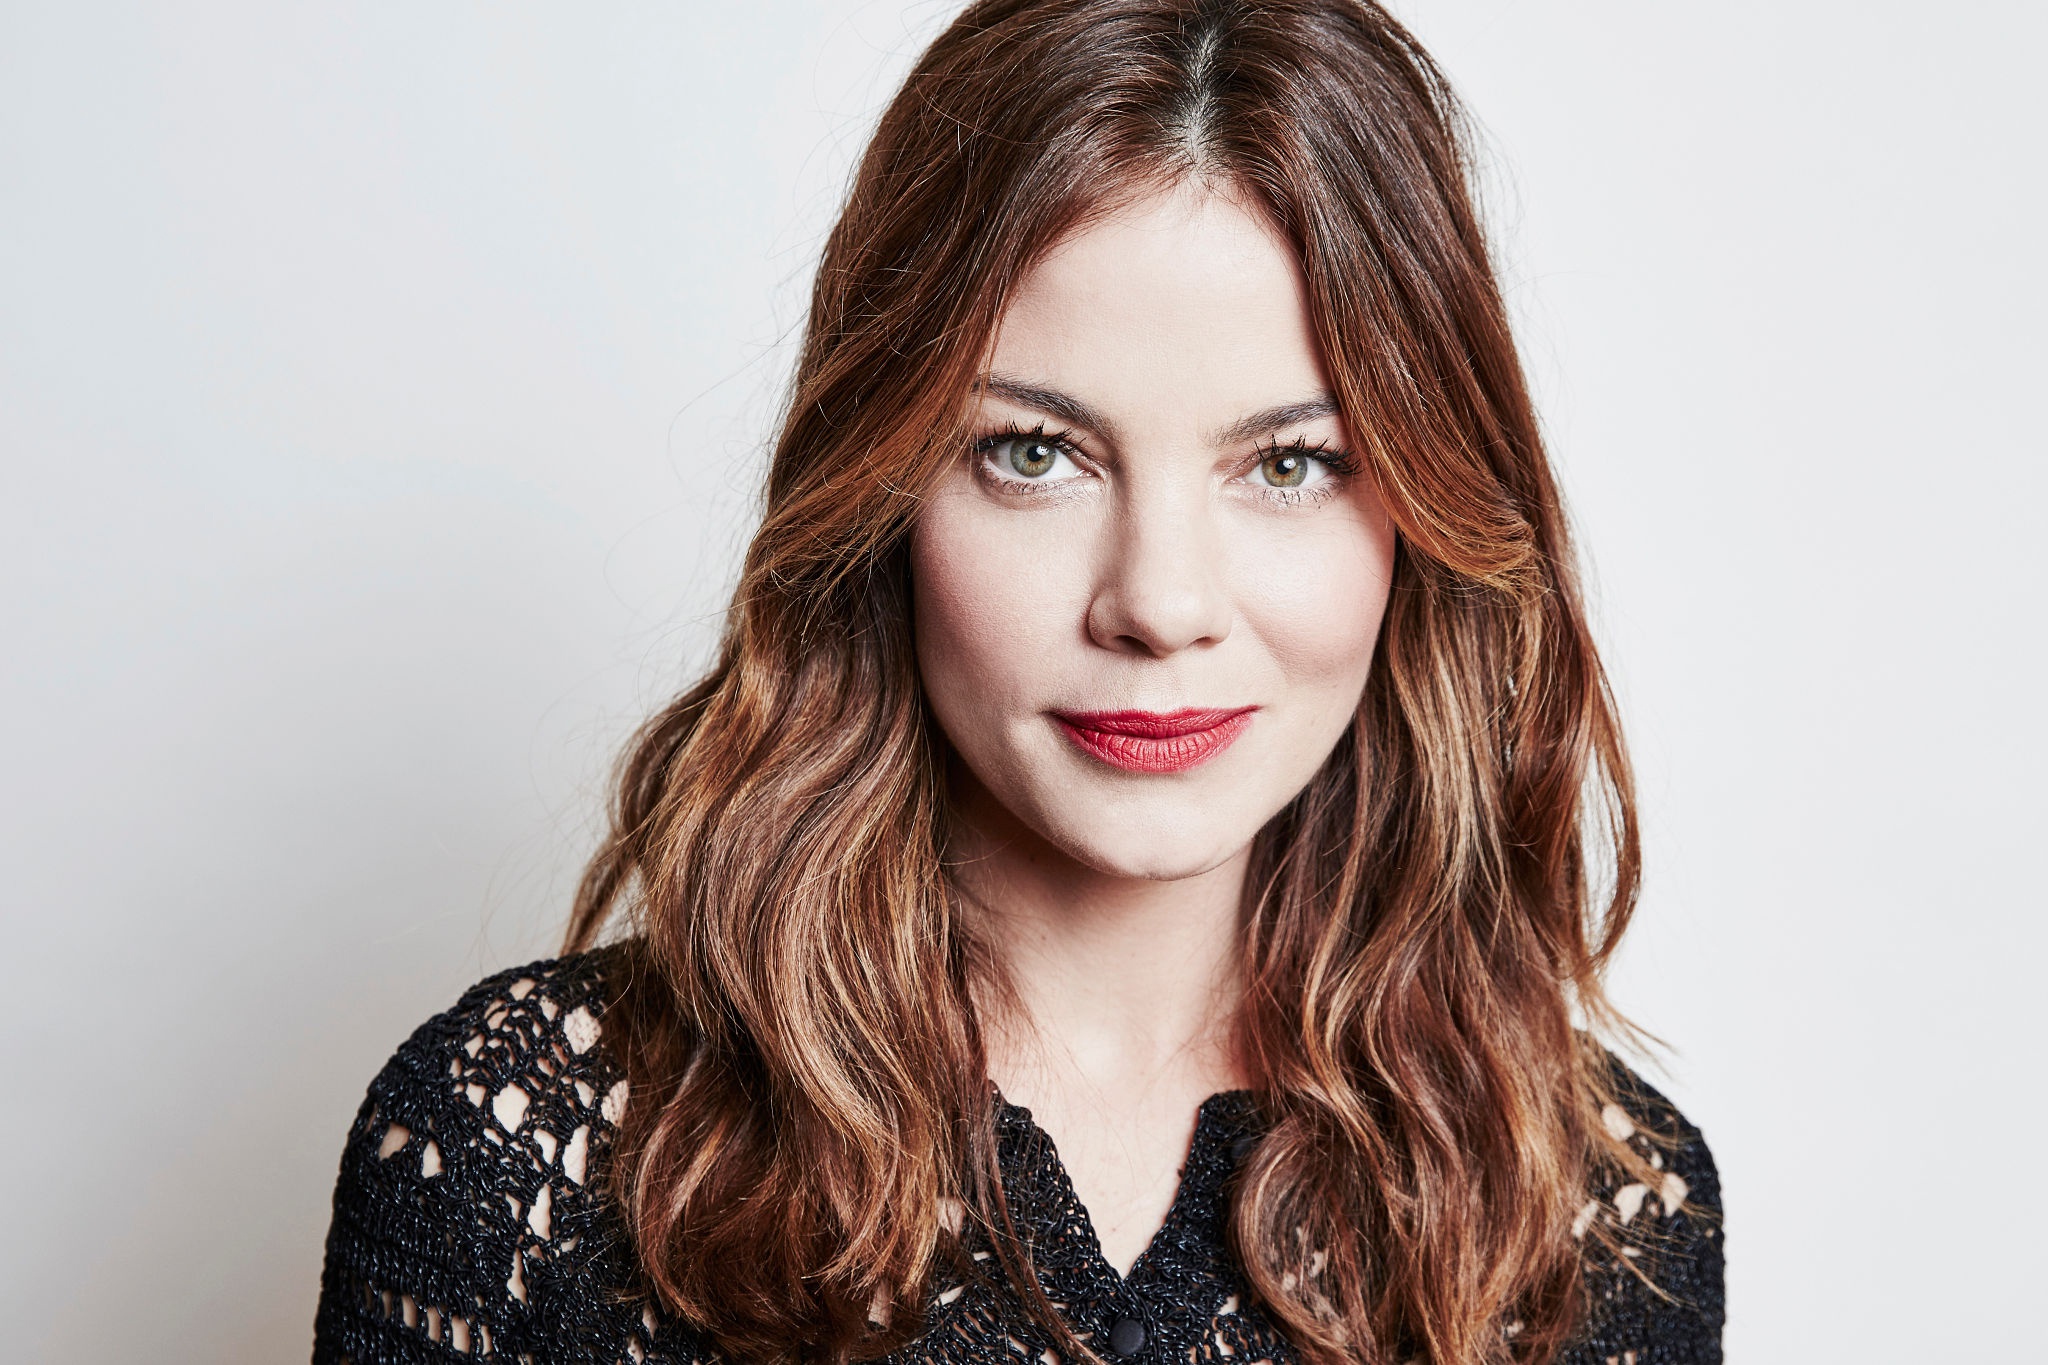 celebrity, michelle monaghan, actress, american, brunette, face, lipstick